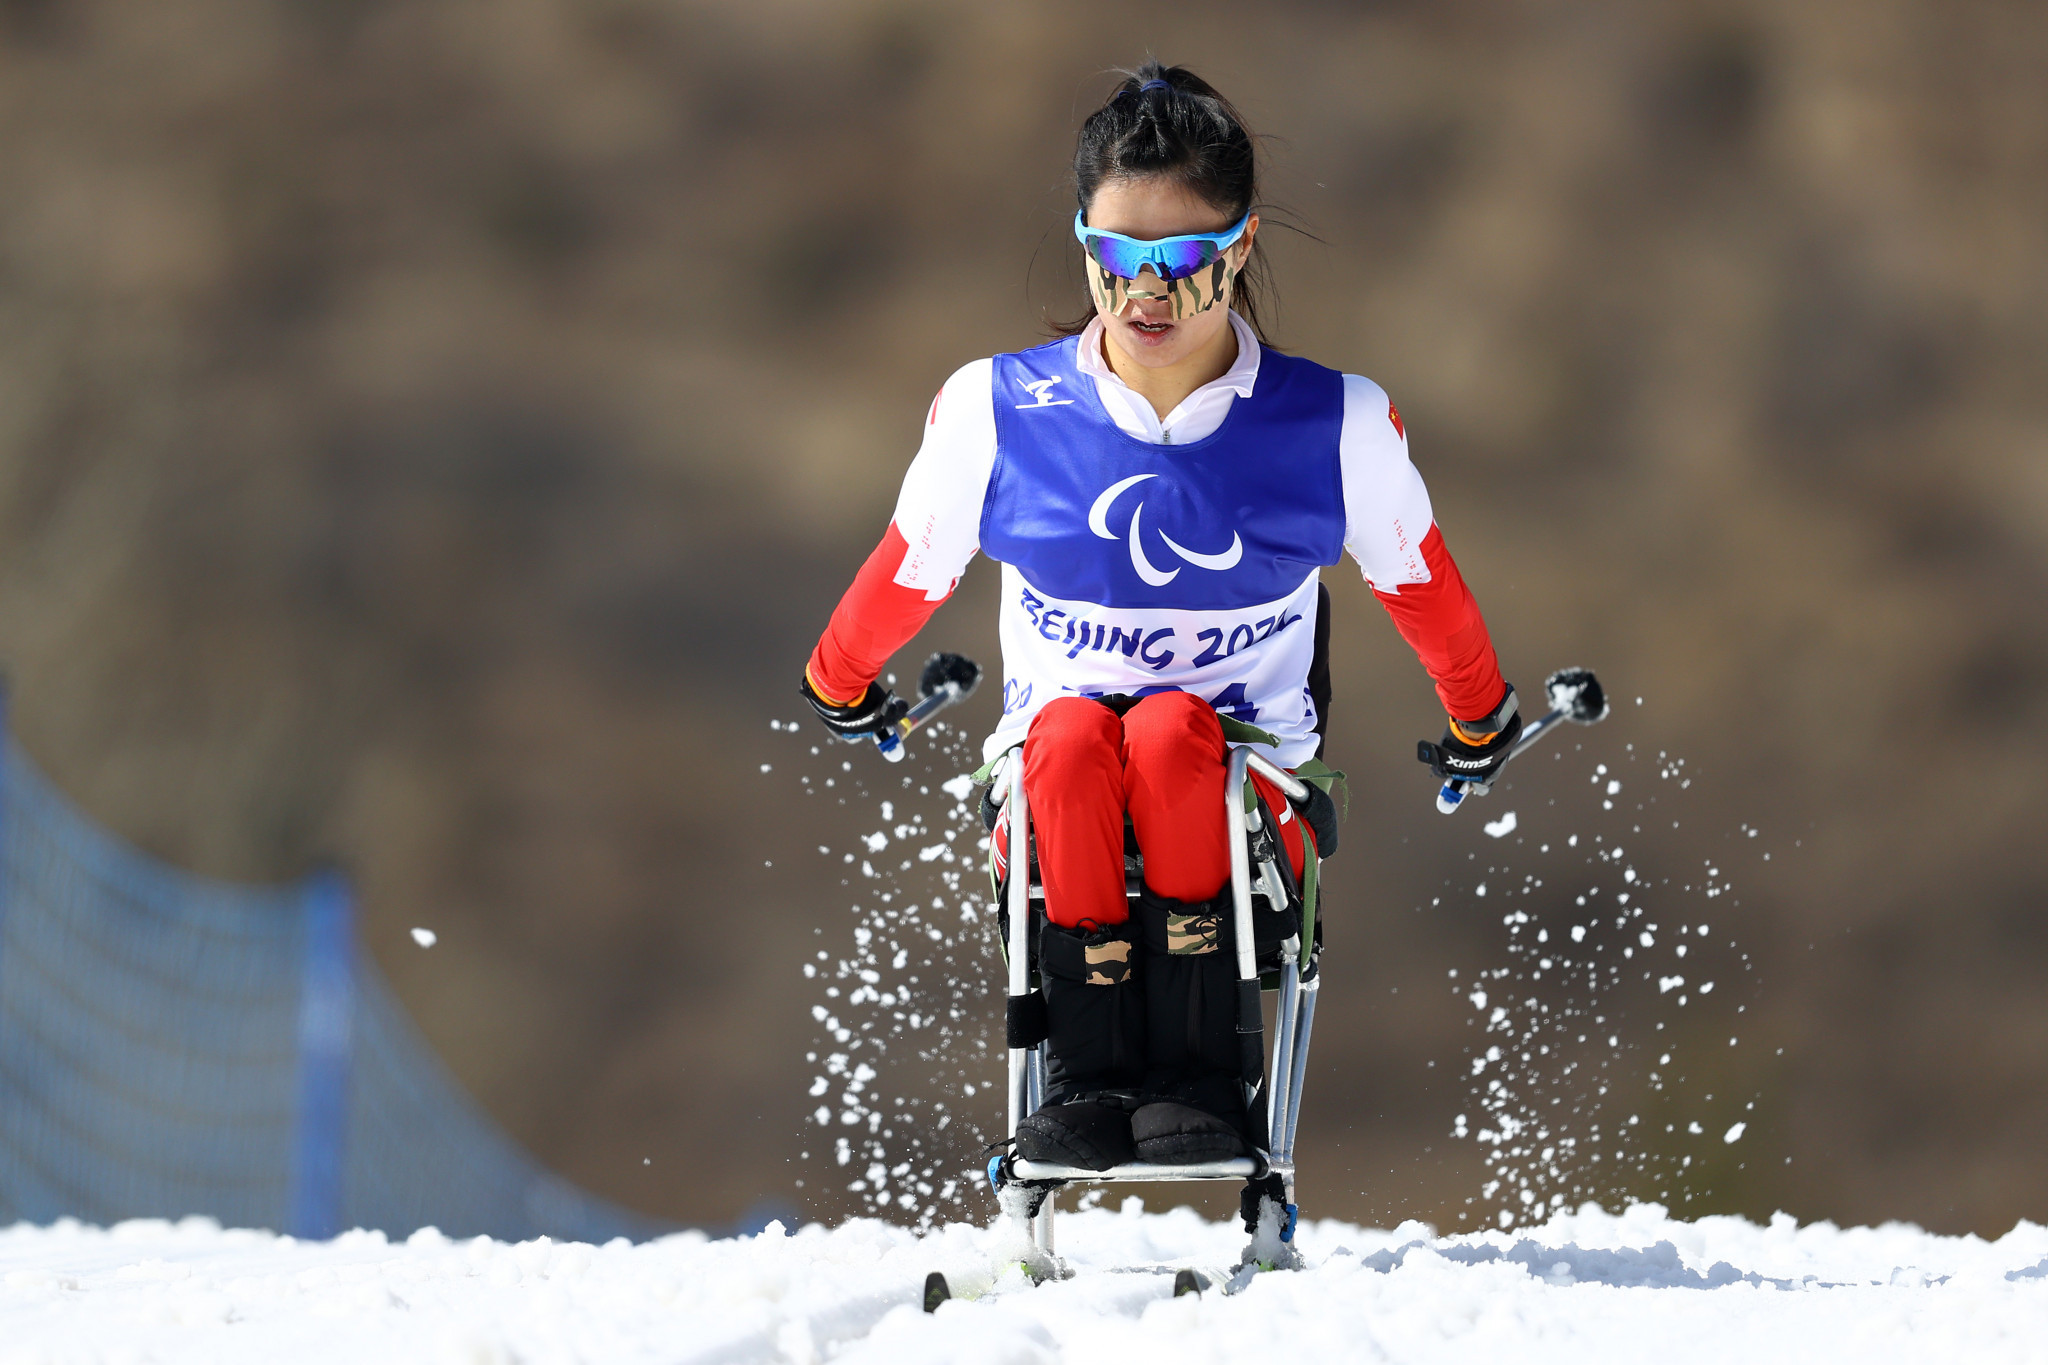 Treble Para cross-country skiing gold medallist Yang Hongqiong is to serve as China's flagbearer at the Beijing 2022 Closing Ceremony ©Getty Images